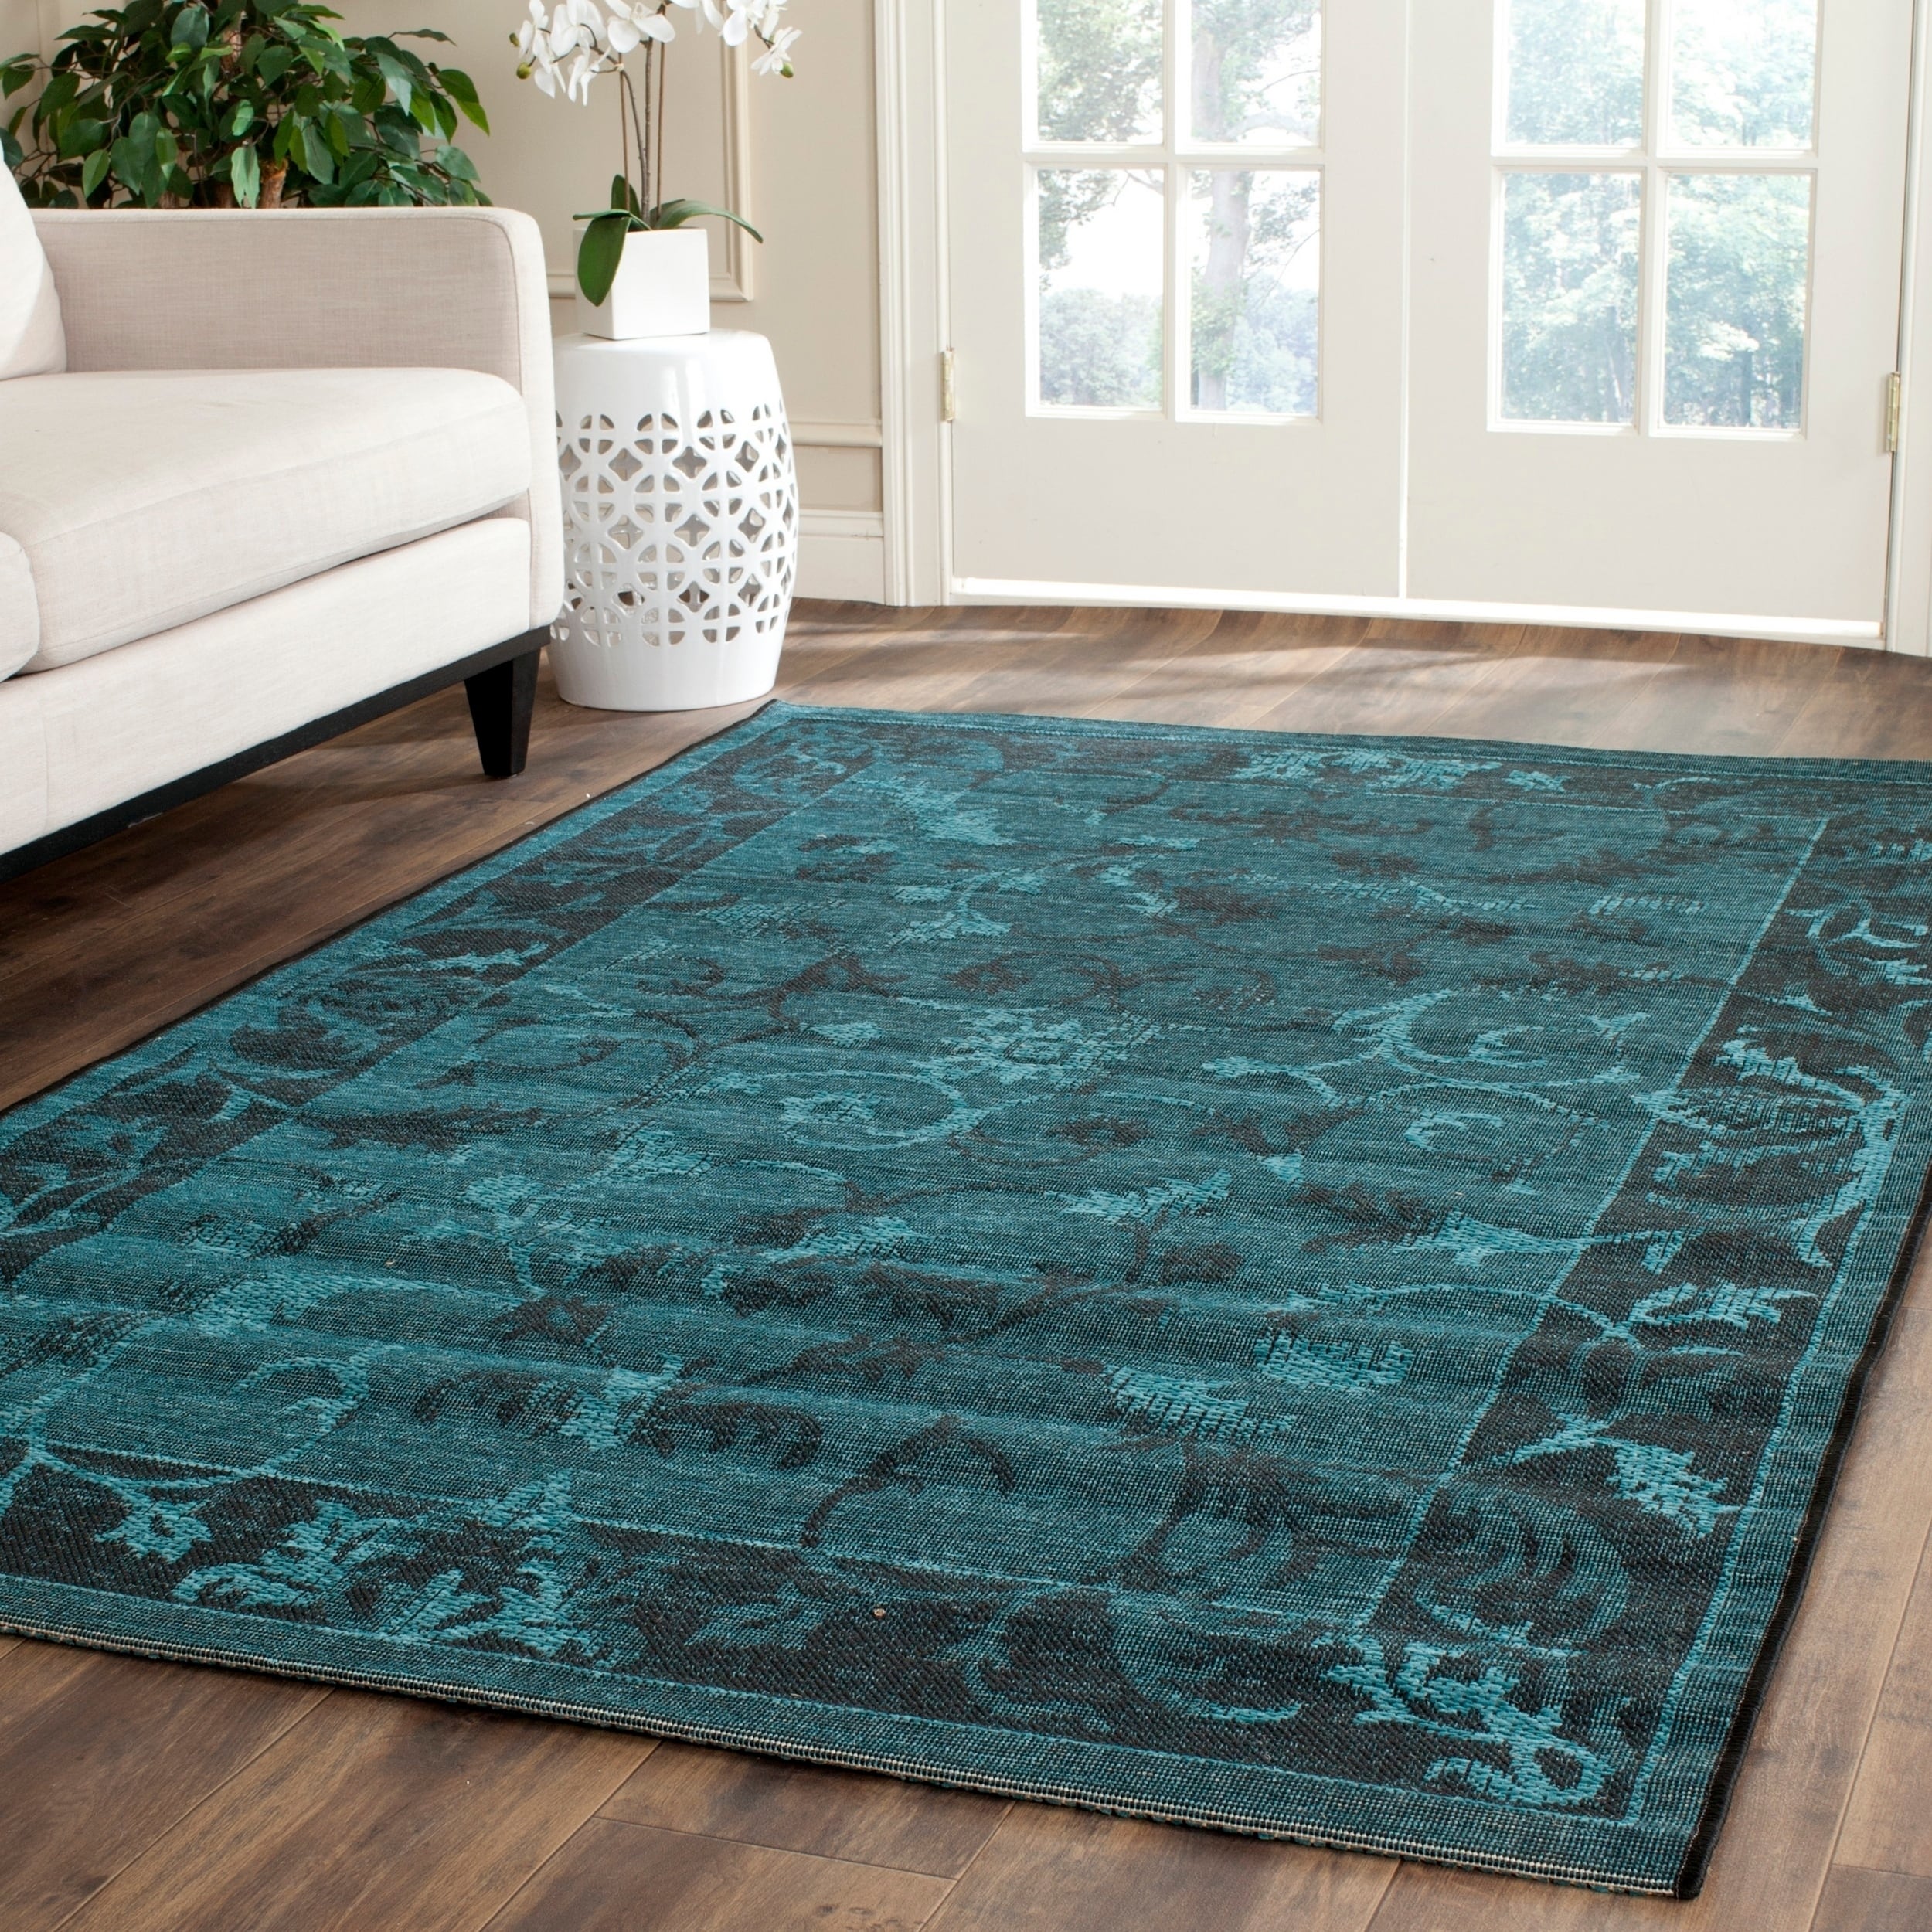 Safavieh Palazzo Black/ Turquoise Over dyed Chenille Rug (4 X 6)